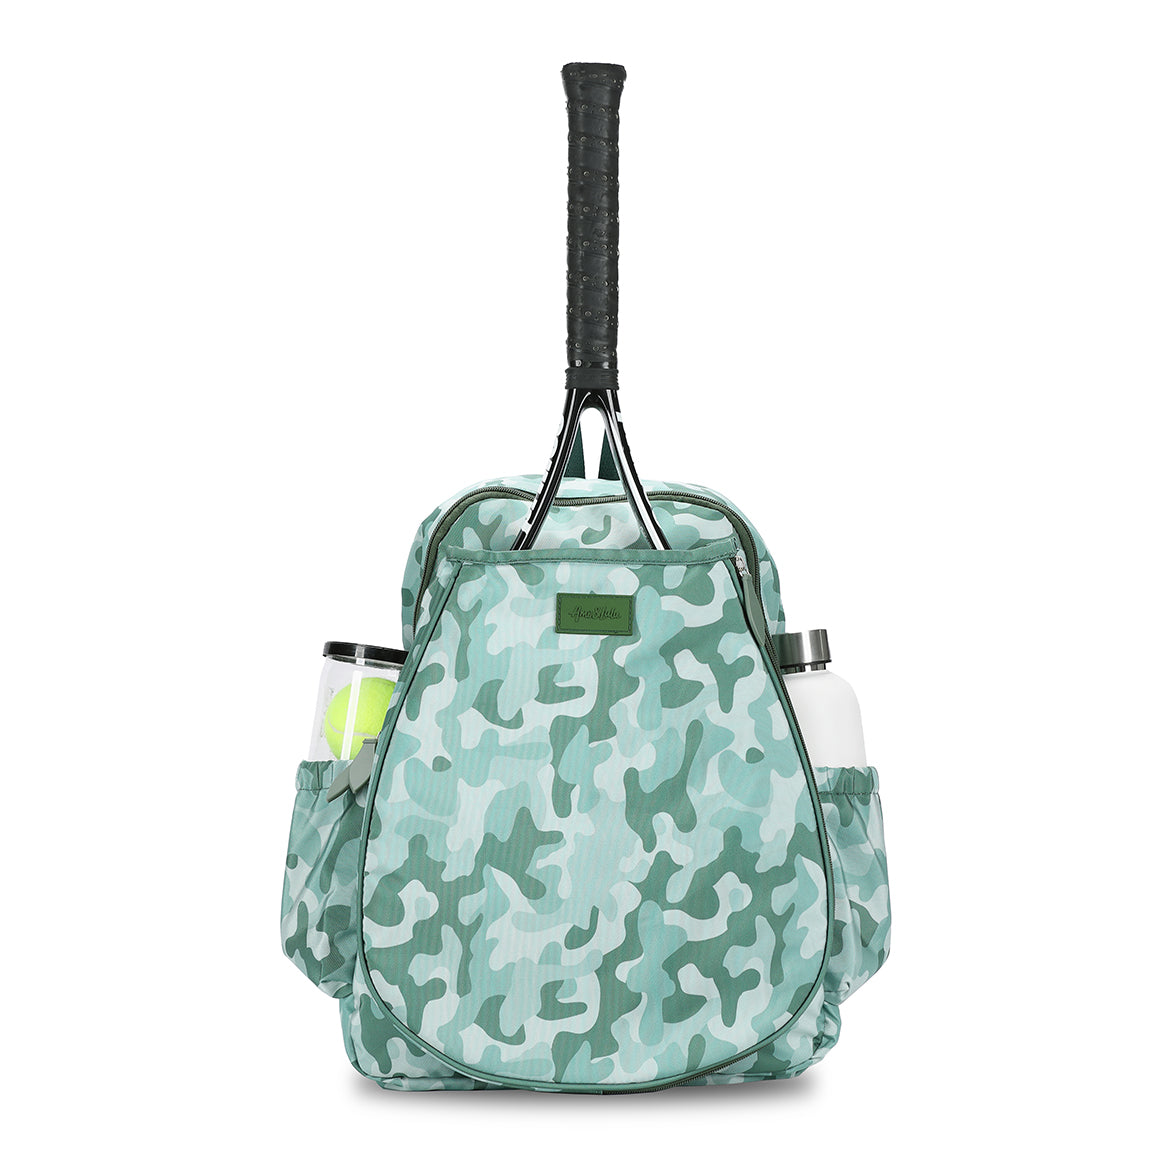 Front view of olive green camo game on tennis backpack. Backpack has water bottle and tennis balls in side pockets.